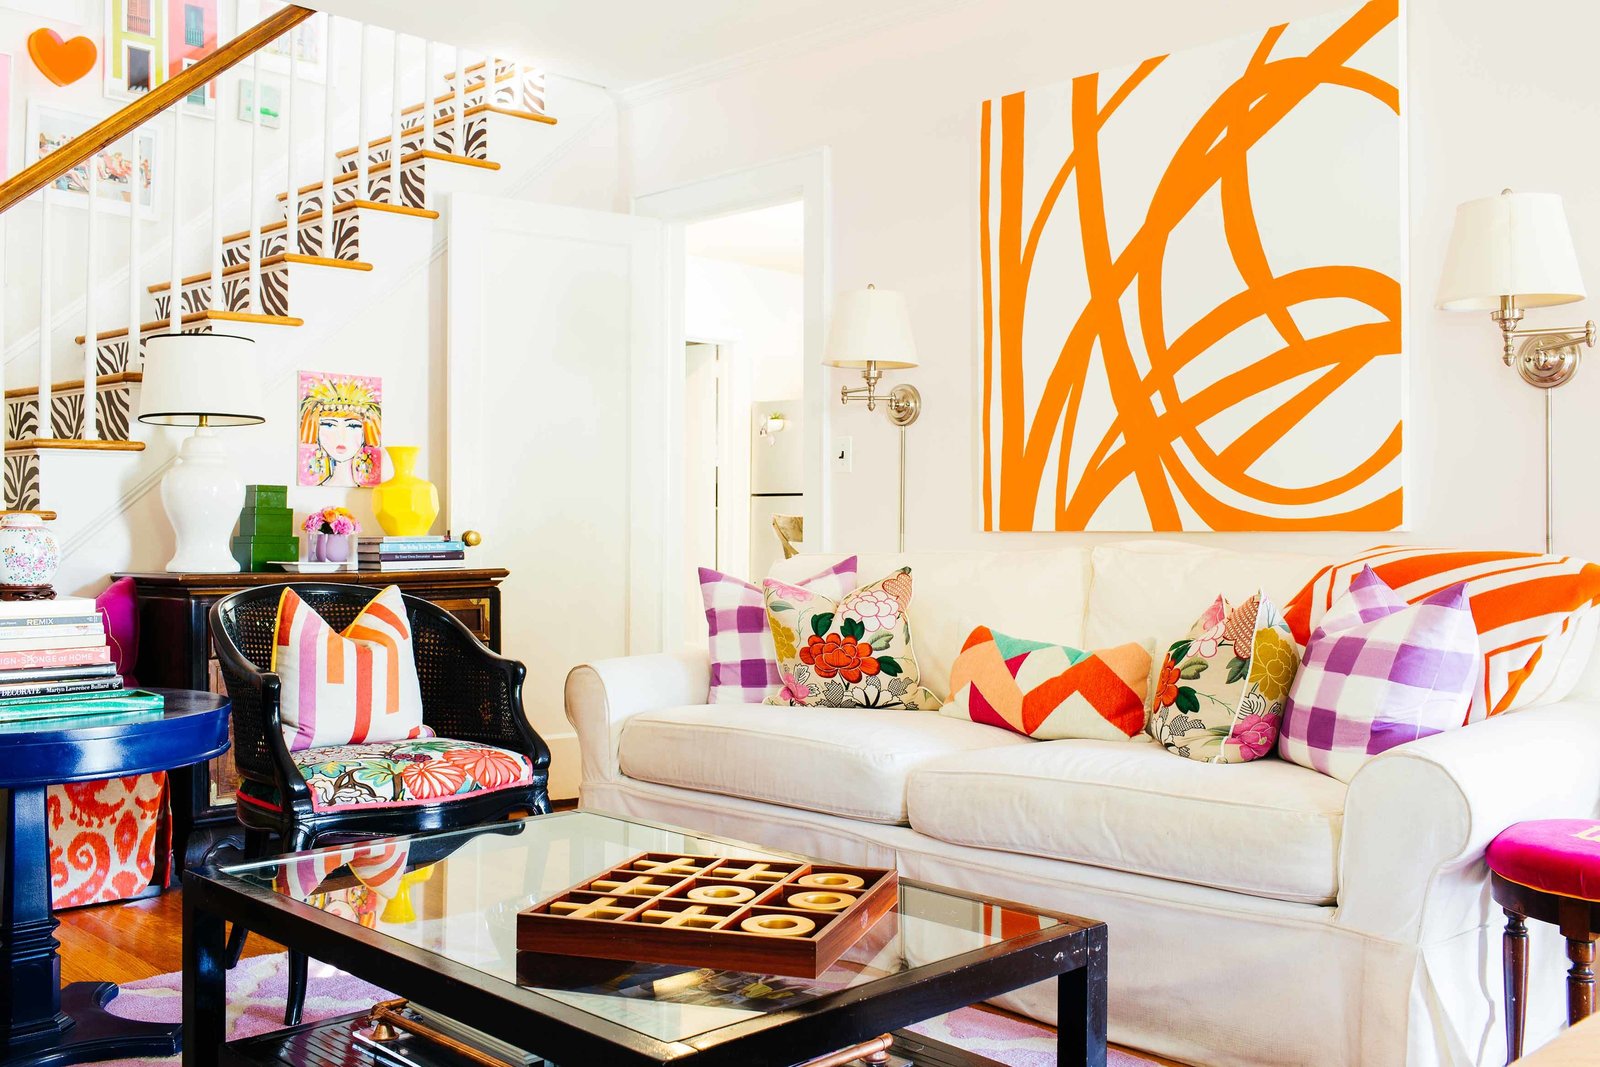 A living room with a large orange and white abstract painting.